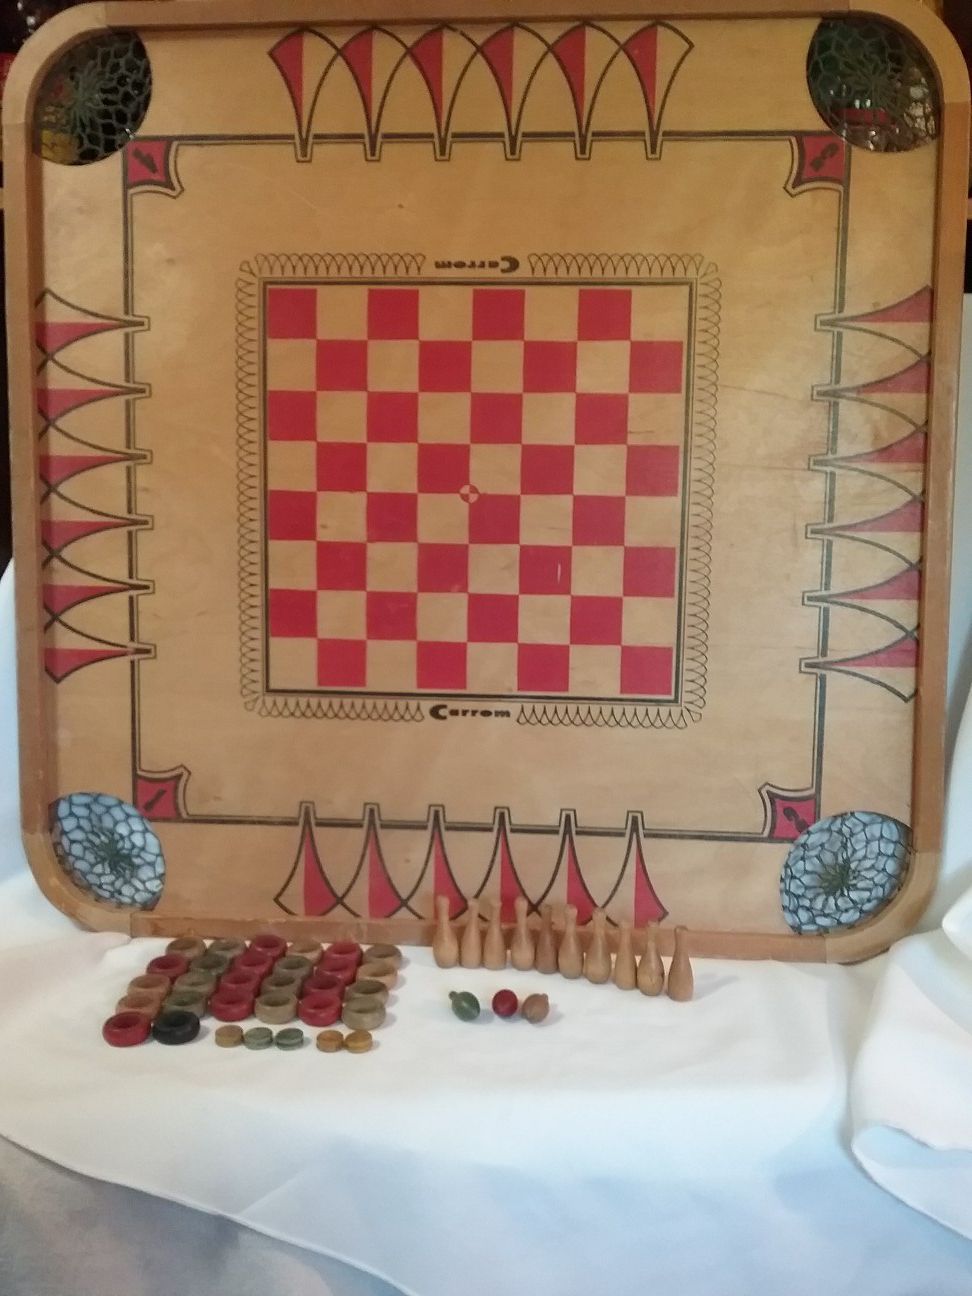 Carrom board game & pieces